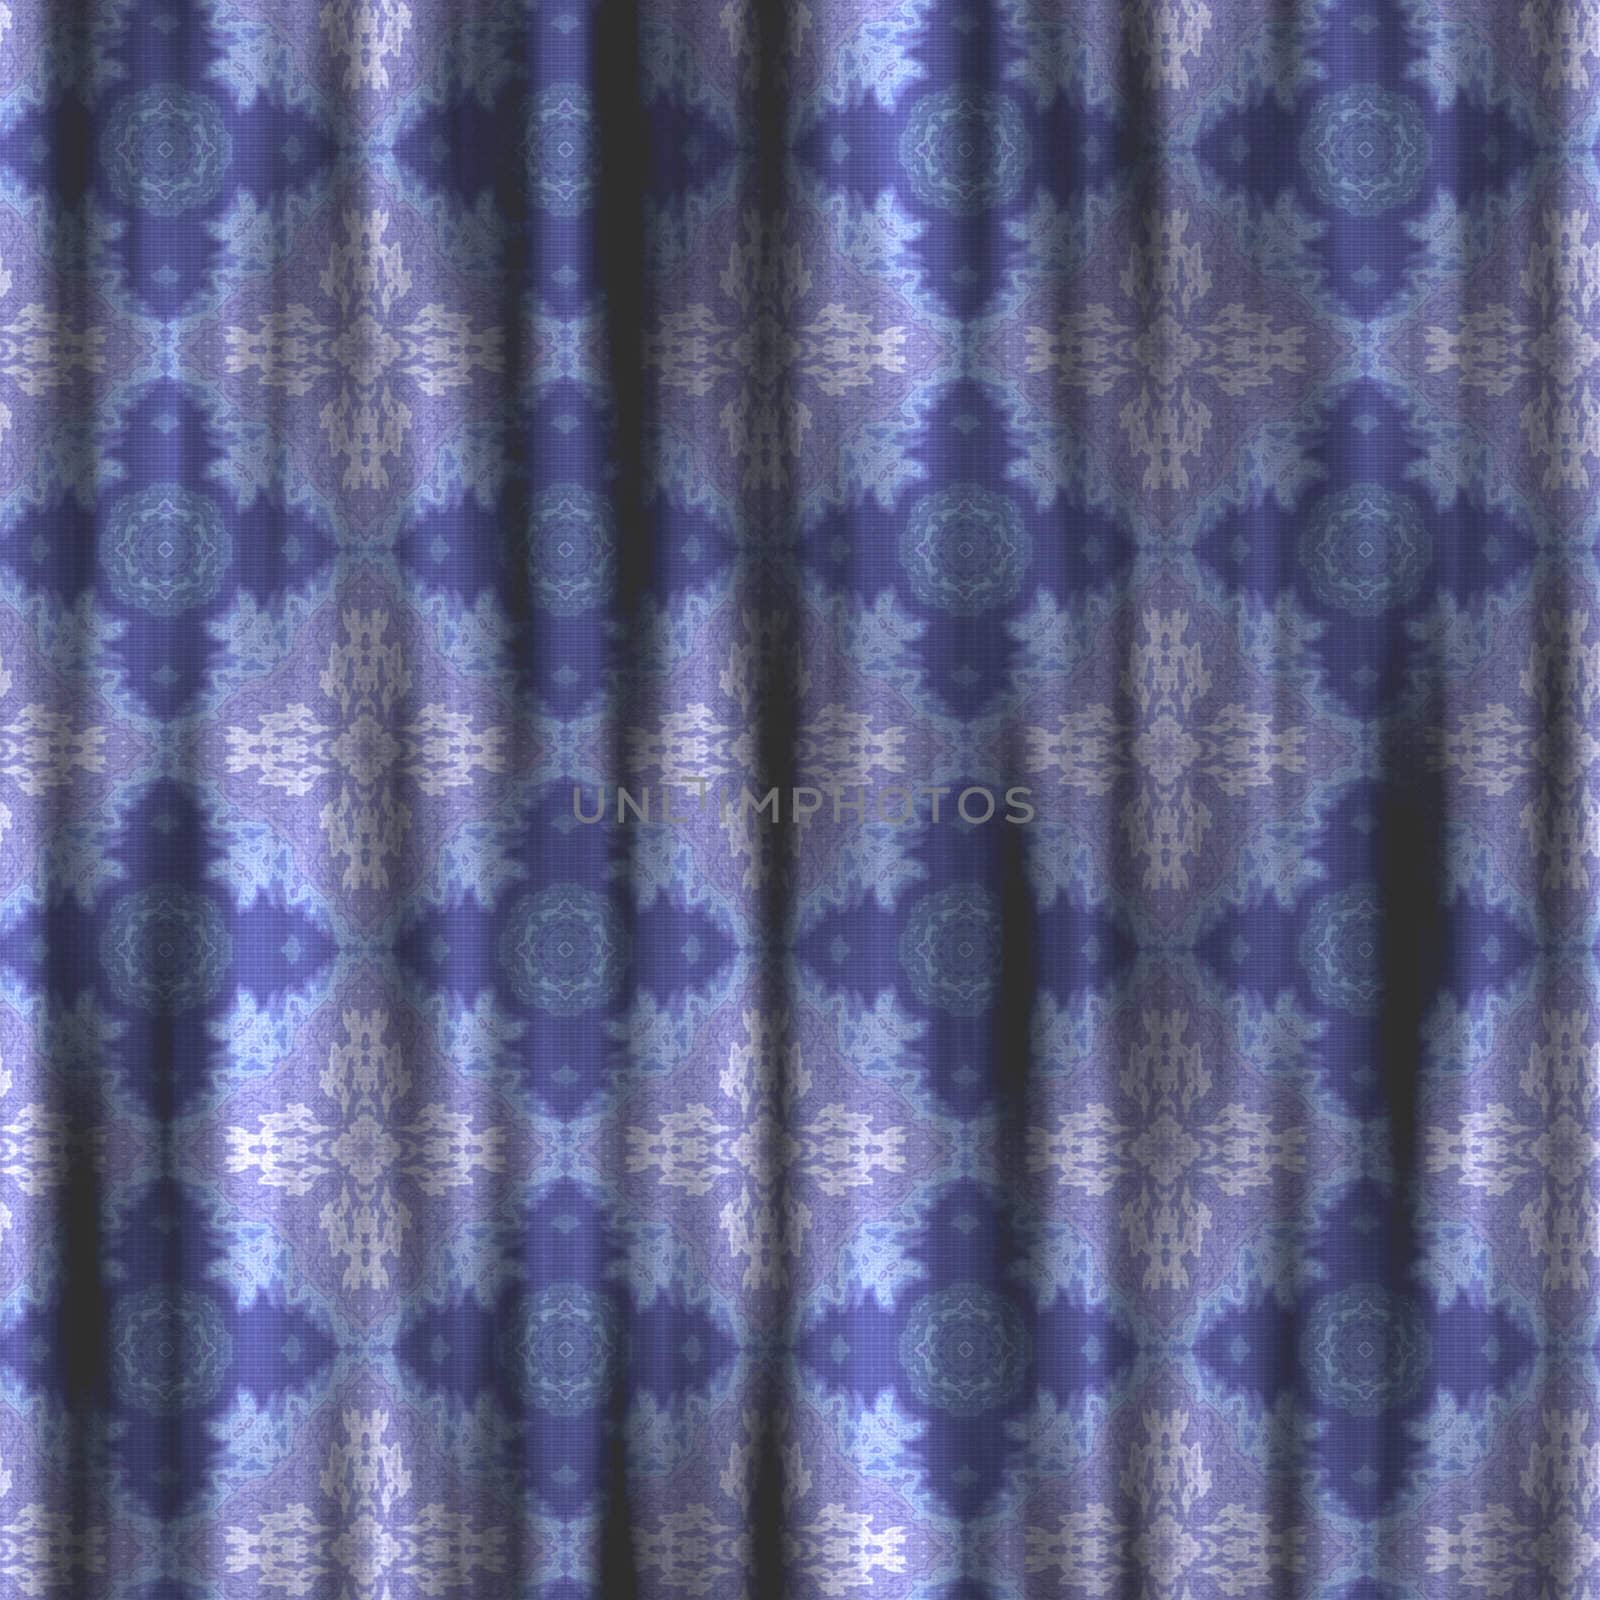 old curtains by clearviewstock